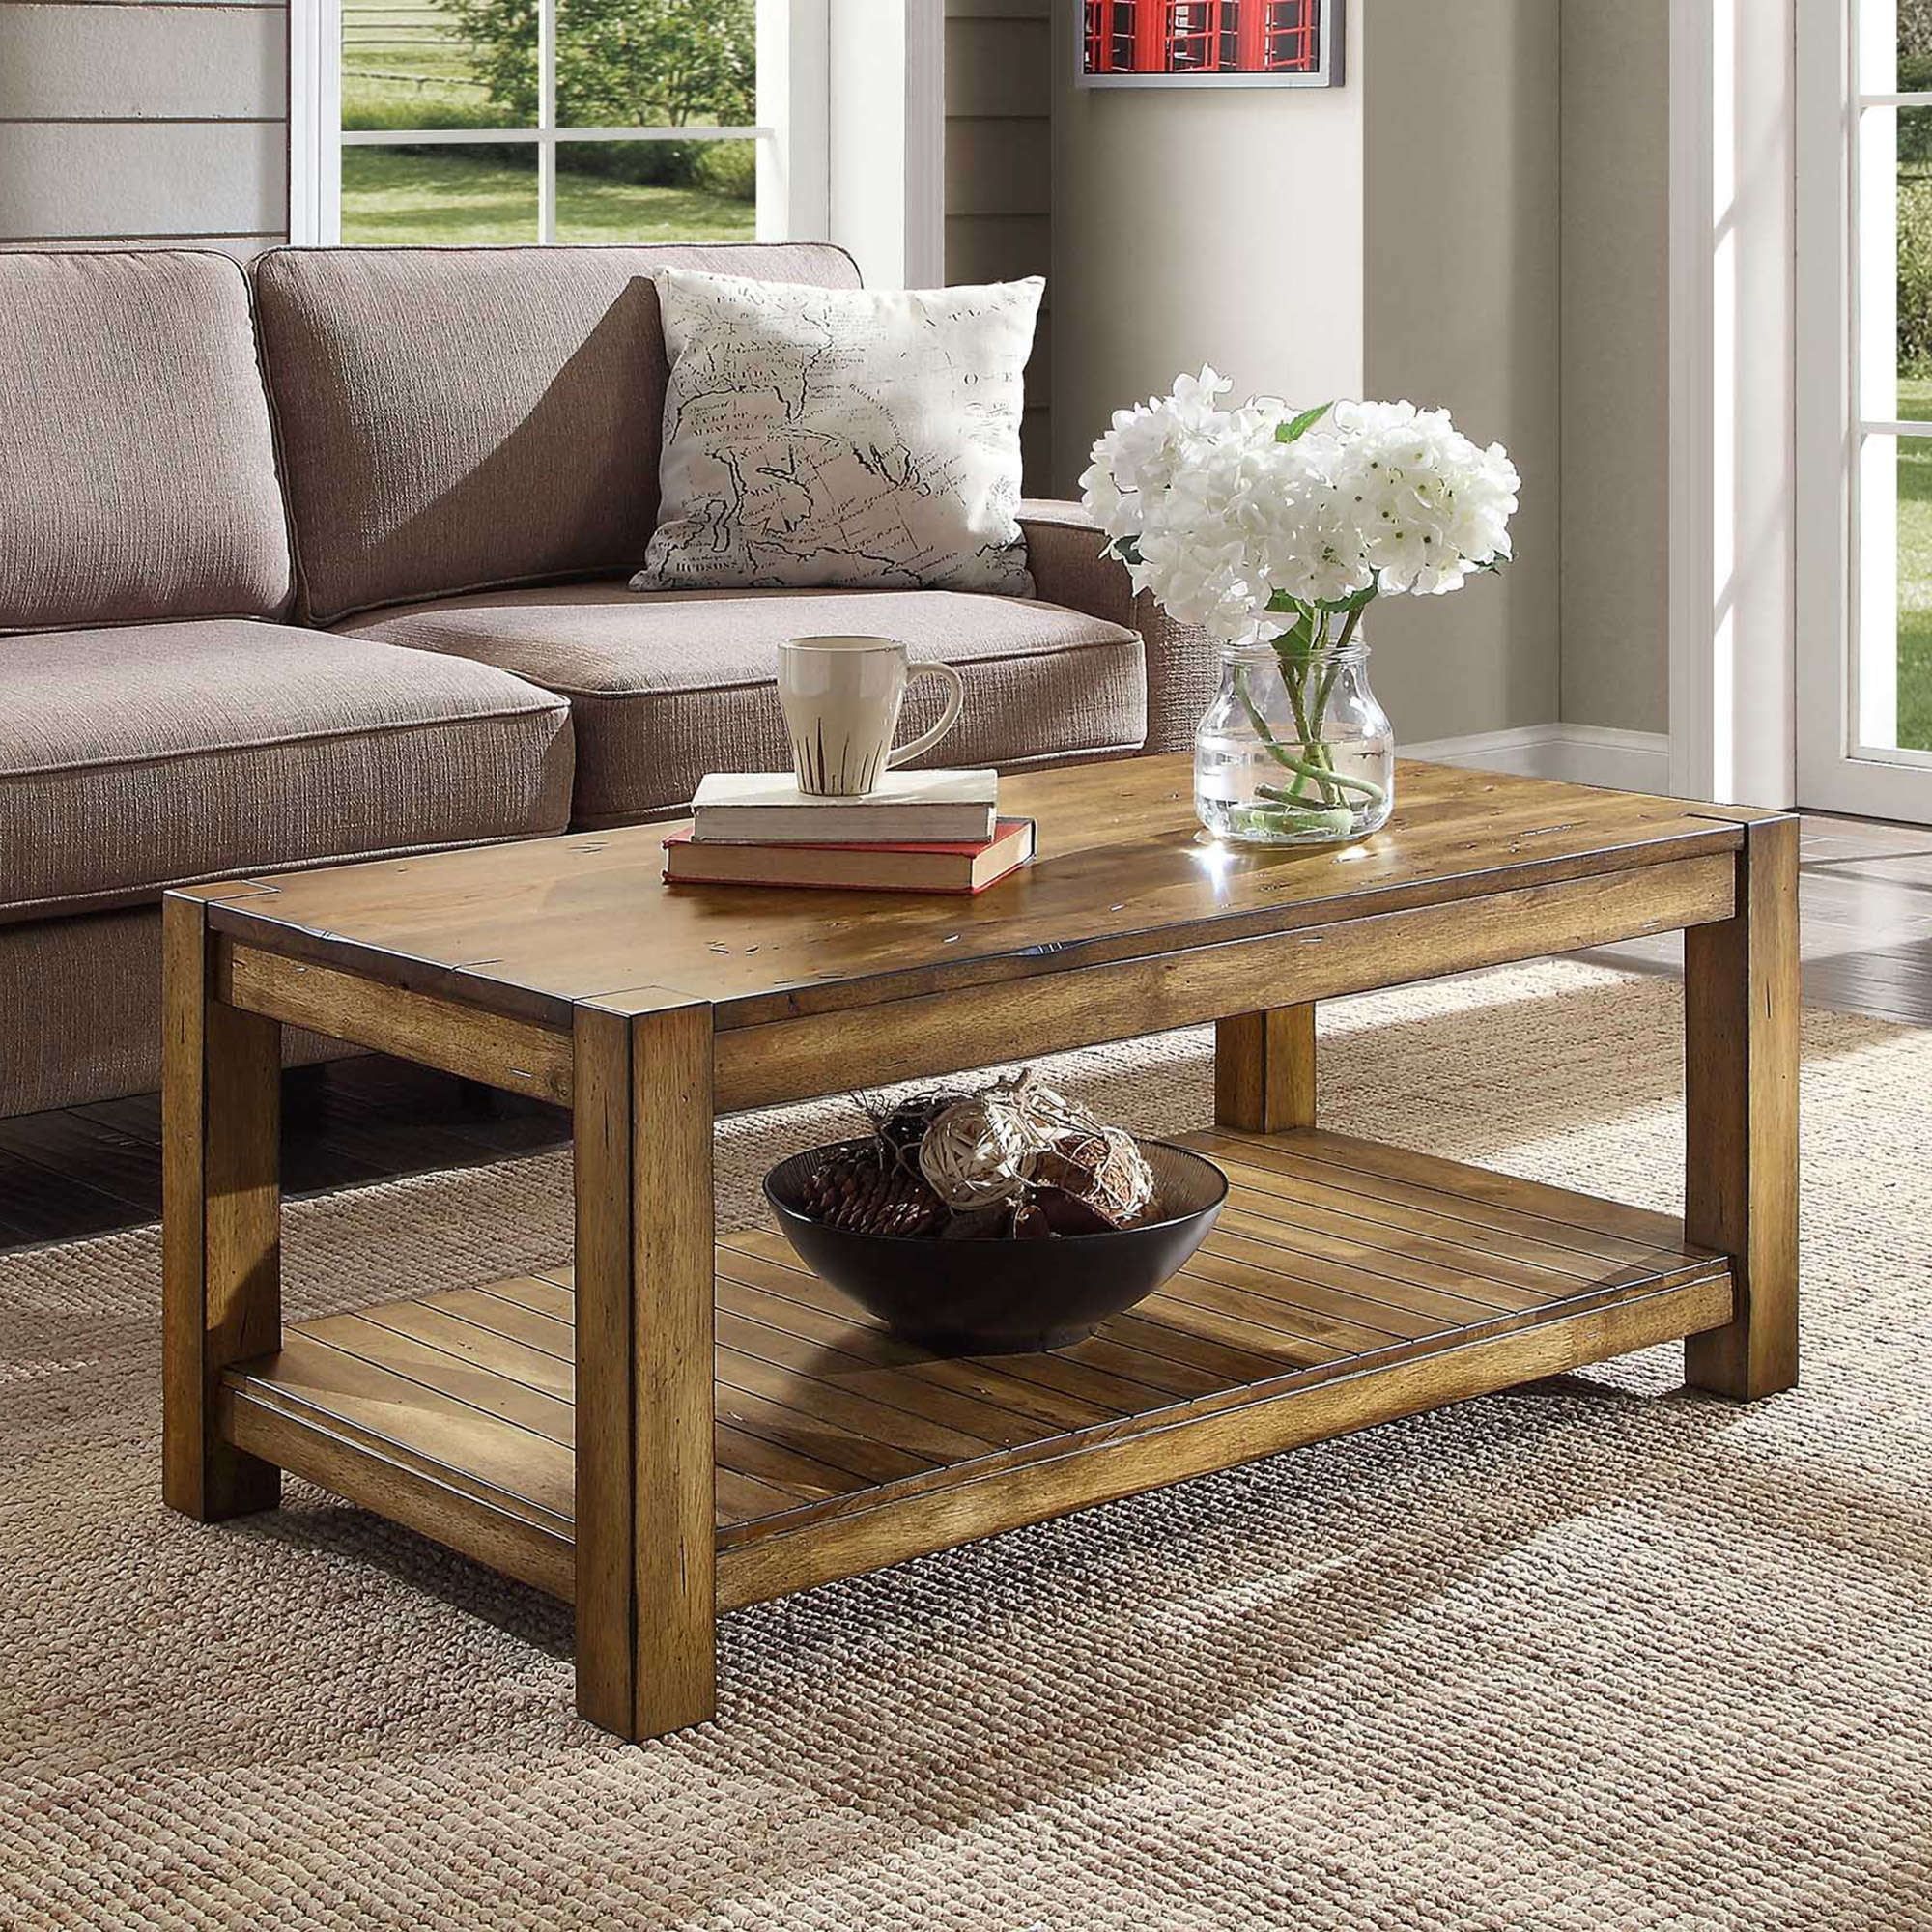 Bryant Solid Wood Coffee Table, Rustic Maple Brown Finish – Walmart In Brown Rustic Coffee Tables (Gallery 2 of 20)